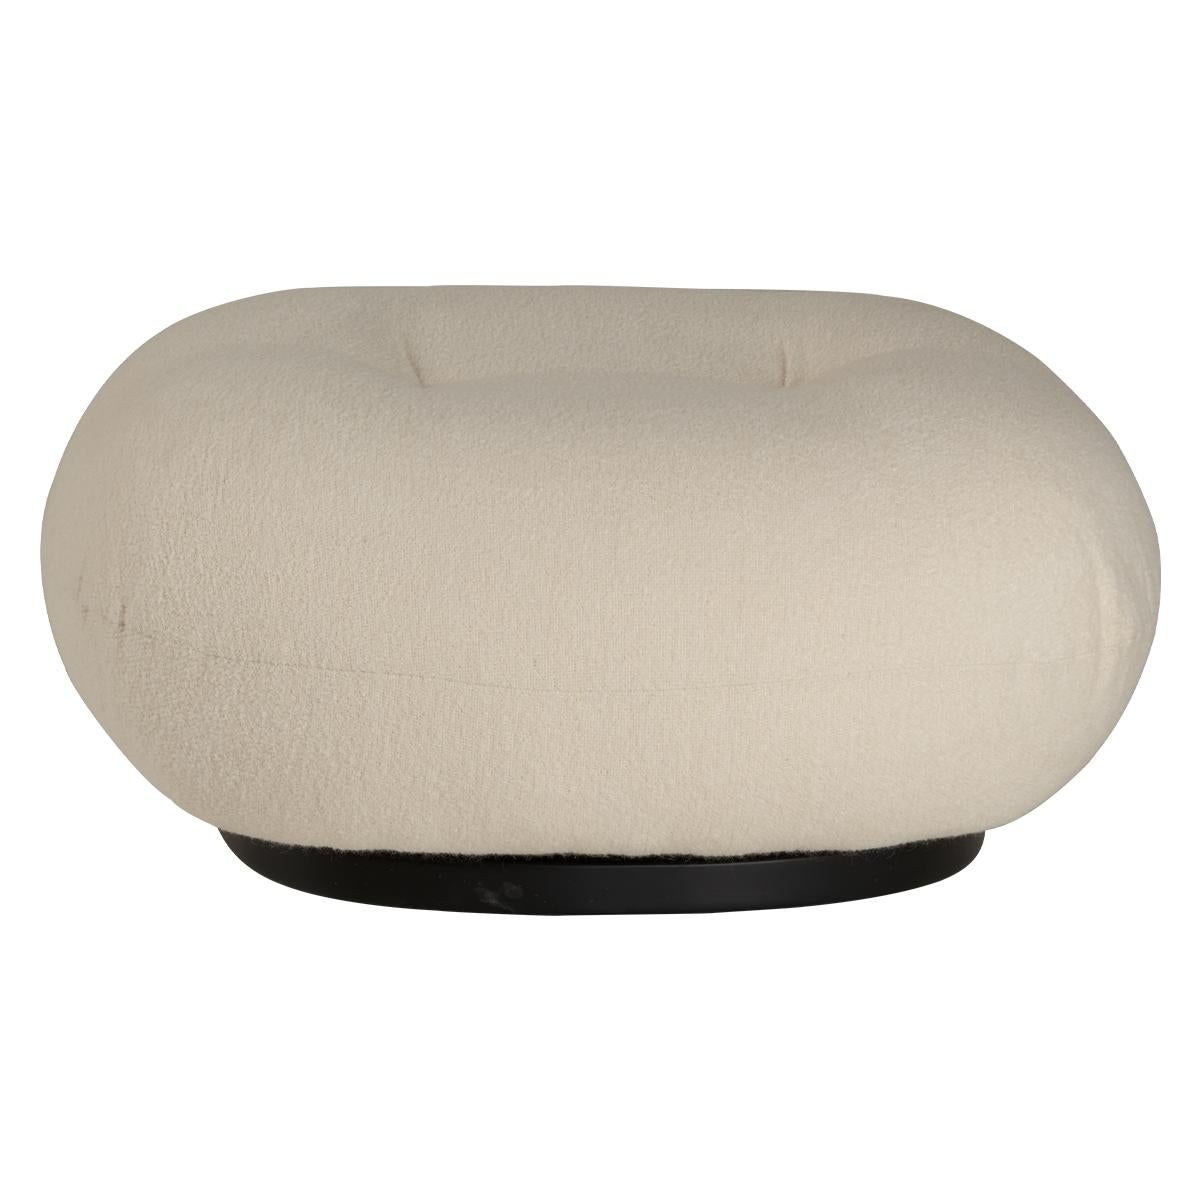 Upholstered pouf ottoman from the Pacha collection designed by Pierre Paulin, to be with Pacha Collection lounge chair and couch series. Price indicative and finalised upon fabric selection.

The Pacha Collection was designed in 1975, it replaced